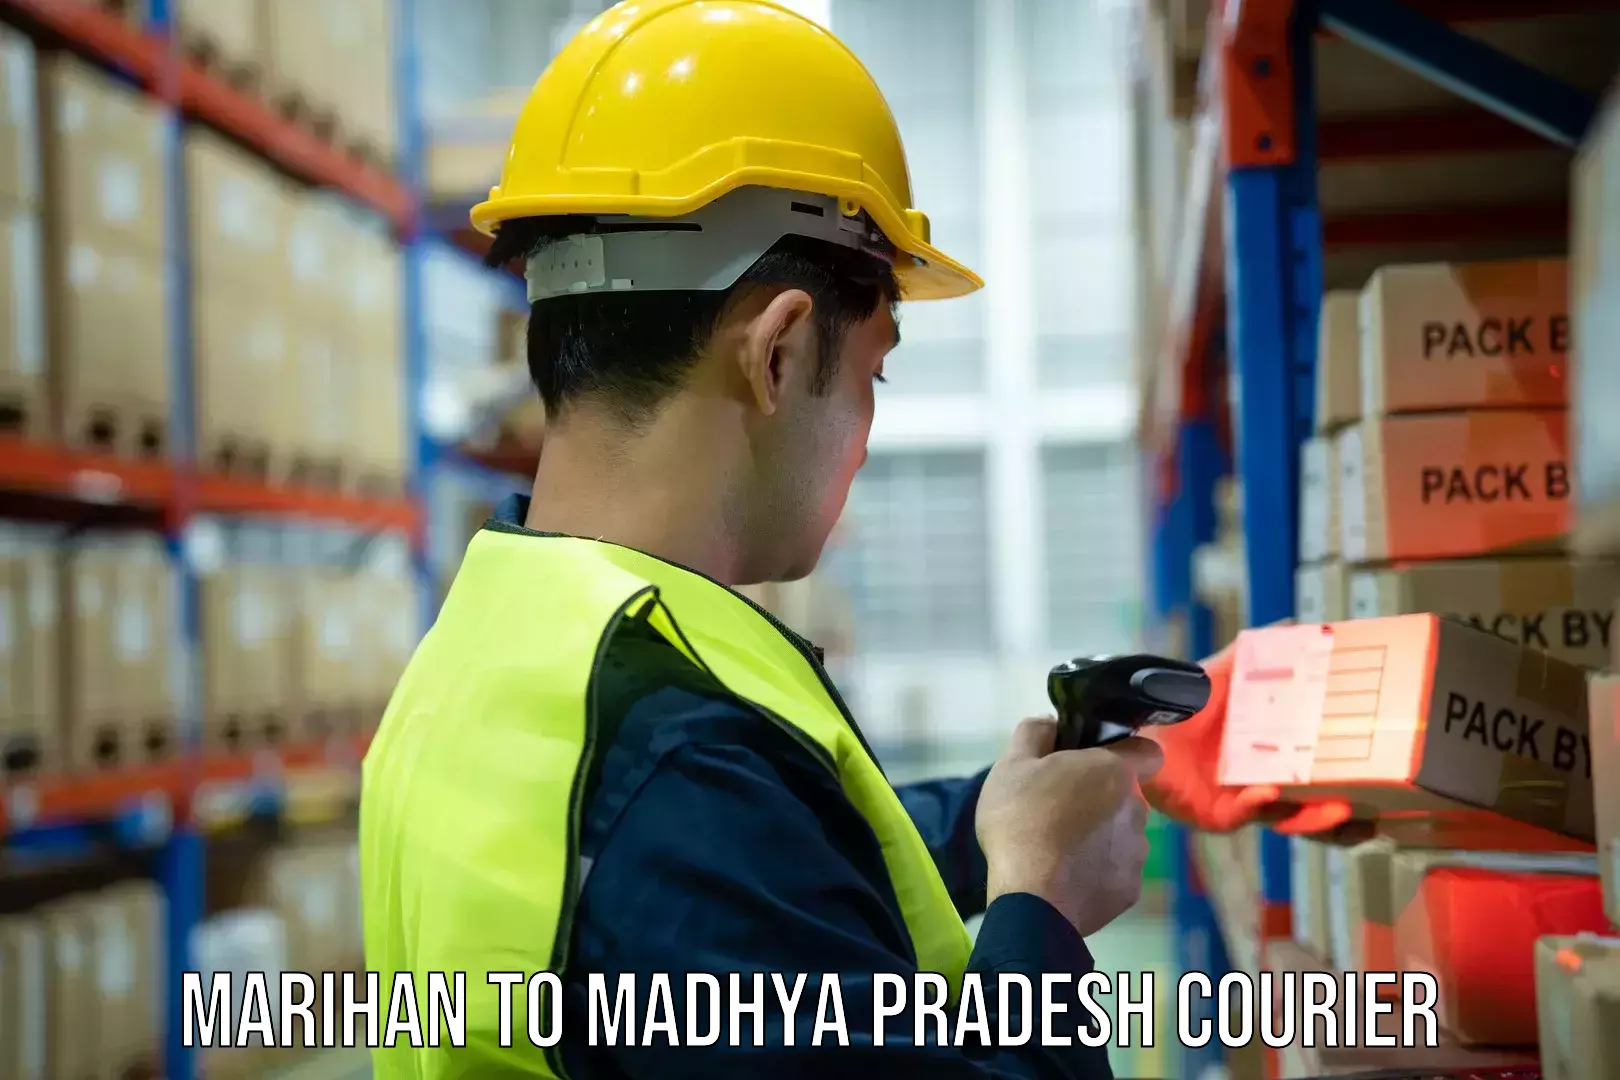 State-of-the-art courier technology Marihan to Madhya Pradesh